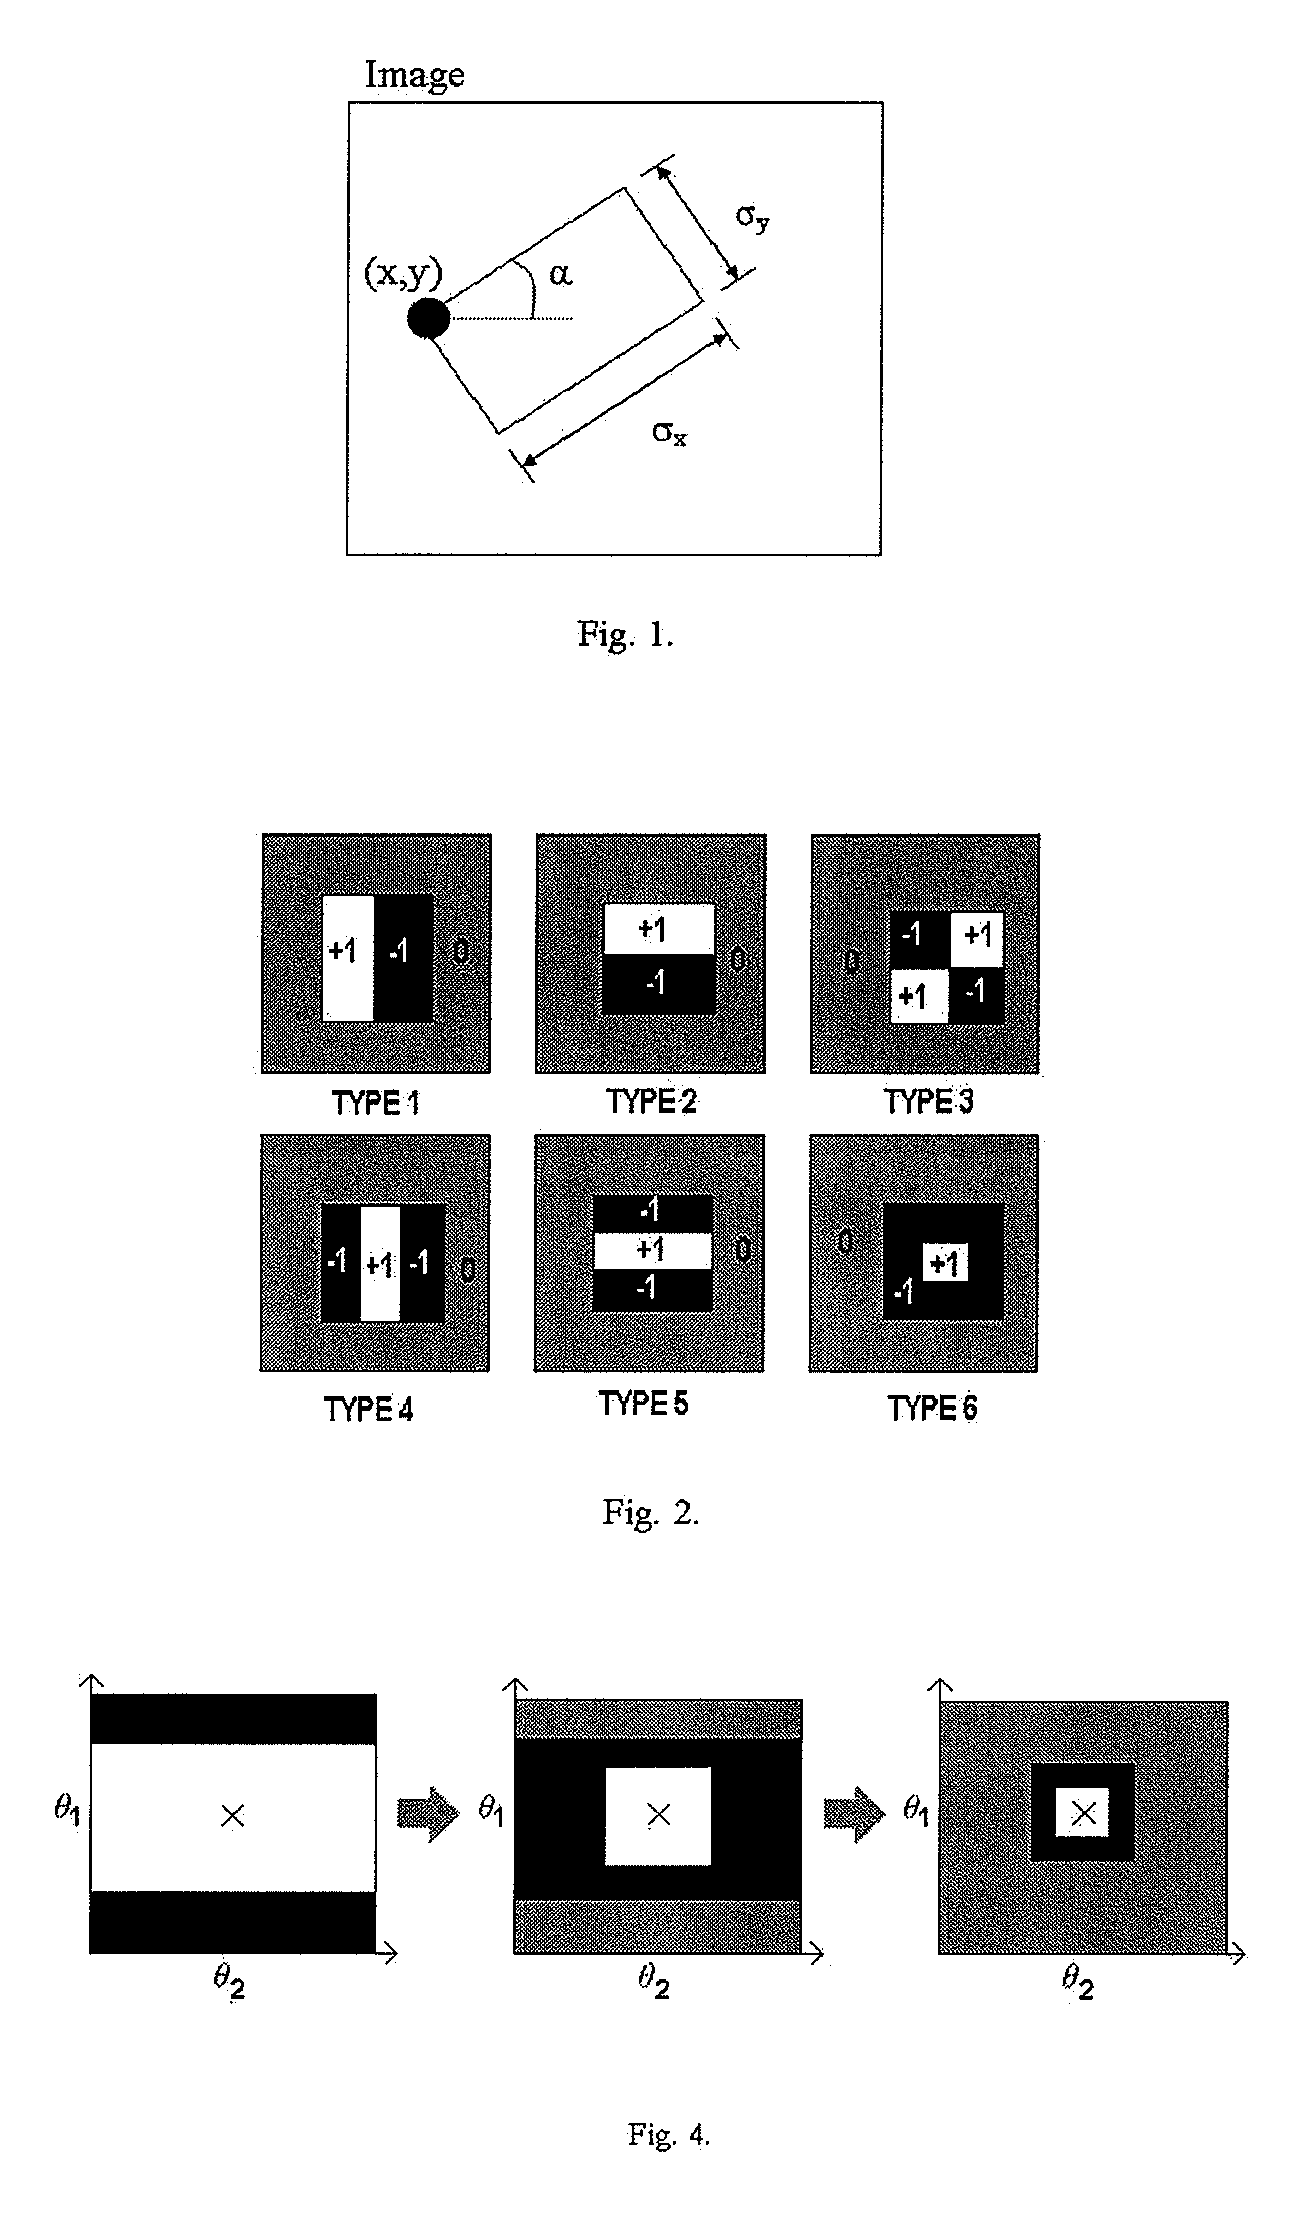 System and Method for Detection of Fetal Anatomies From Ultrasound Images Using a Constrained Probabilistic Boosting Tree